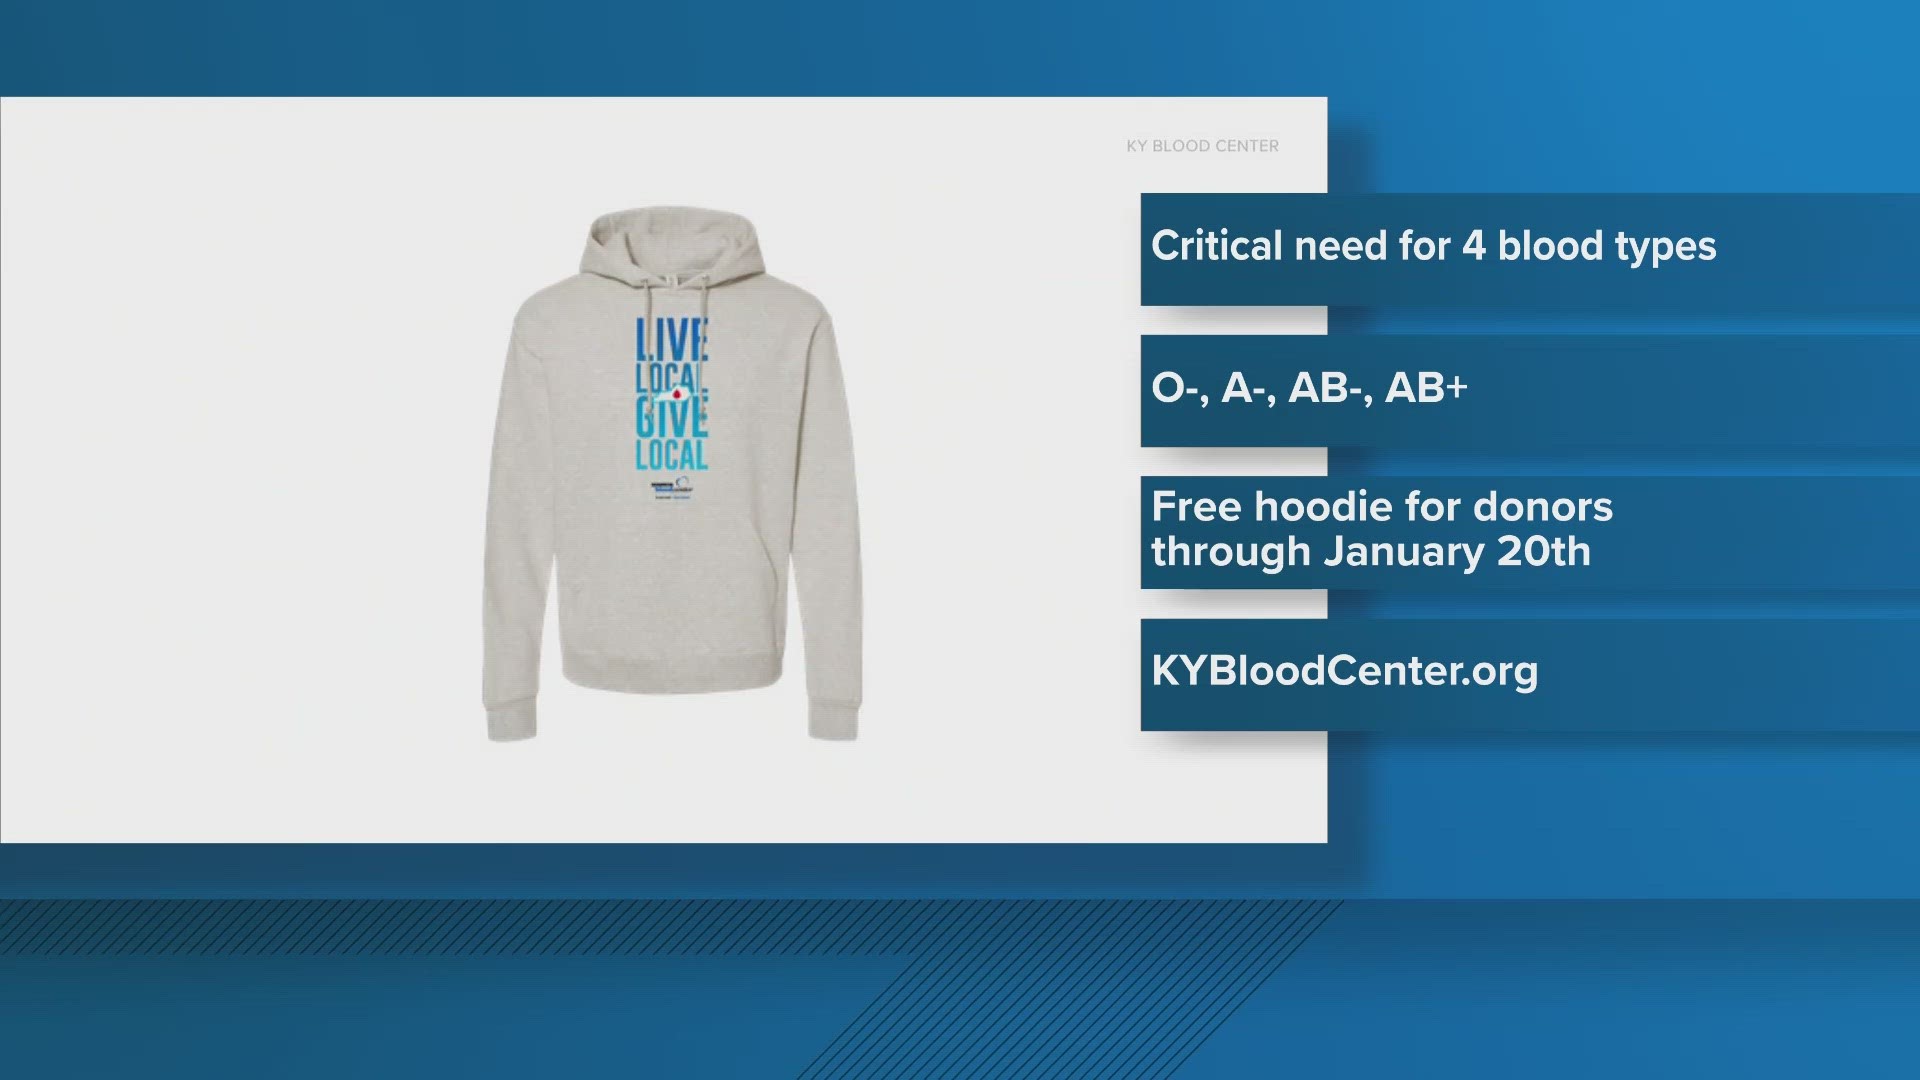 If you donate to the Kentucky Blood Center by Jan. 20, you can get a free hoodie.